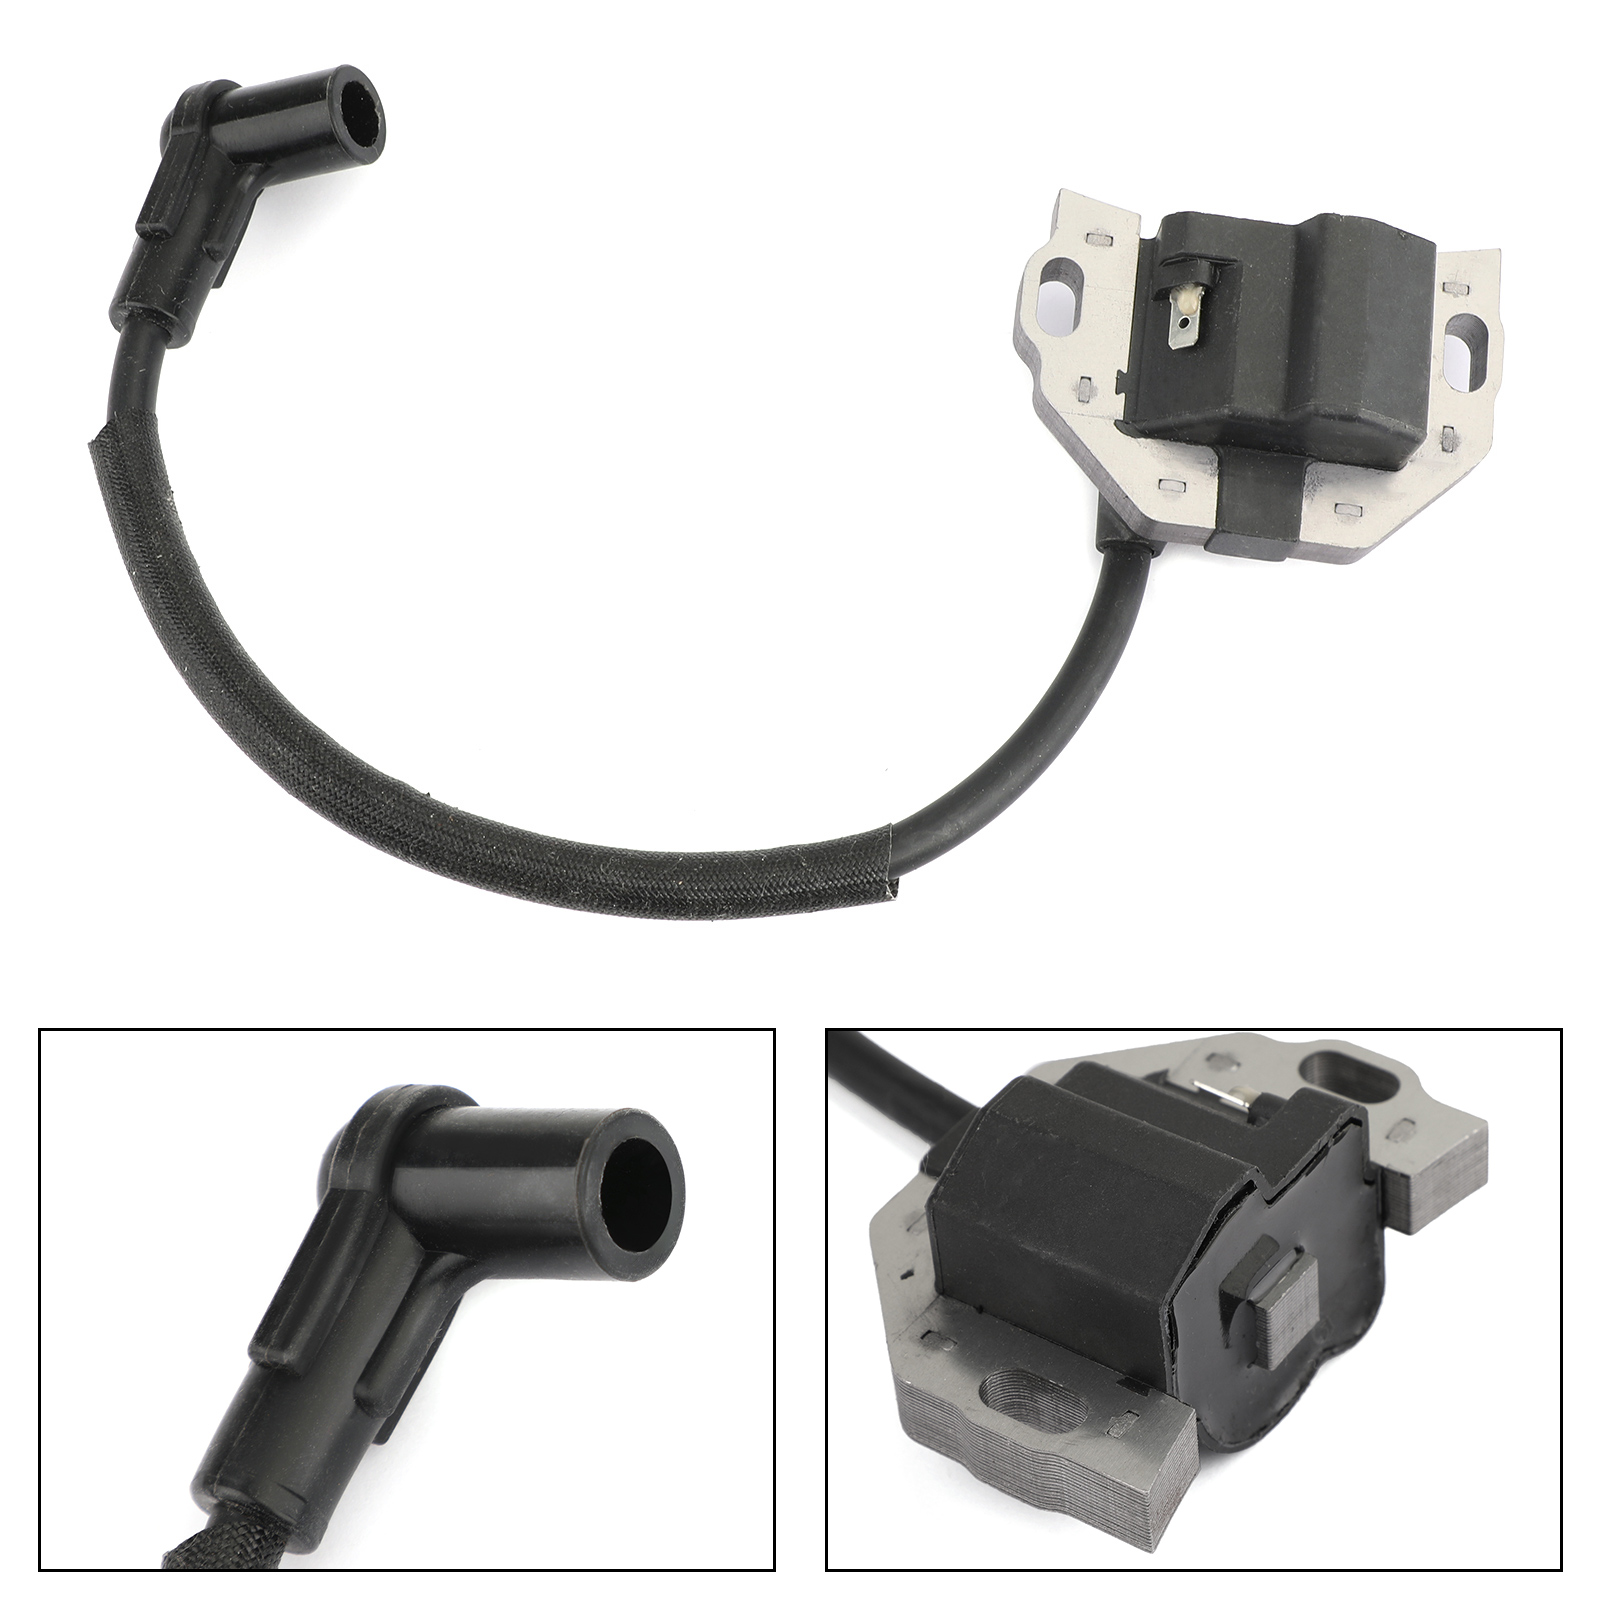 Motor Genic Ignition Coil Fit For Kawasaki 21171-0745 21171-0742 21171-7039 ZF-IG-A00135 - image 2 of 9